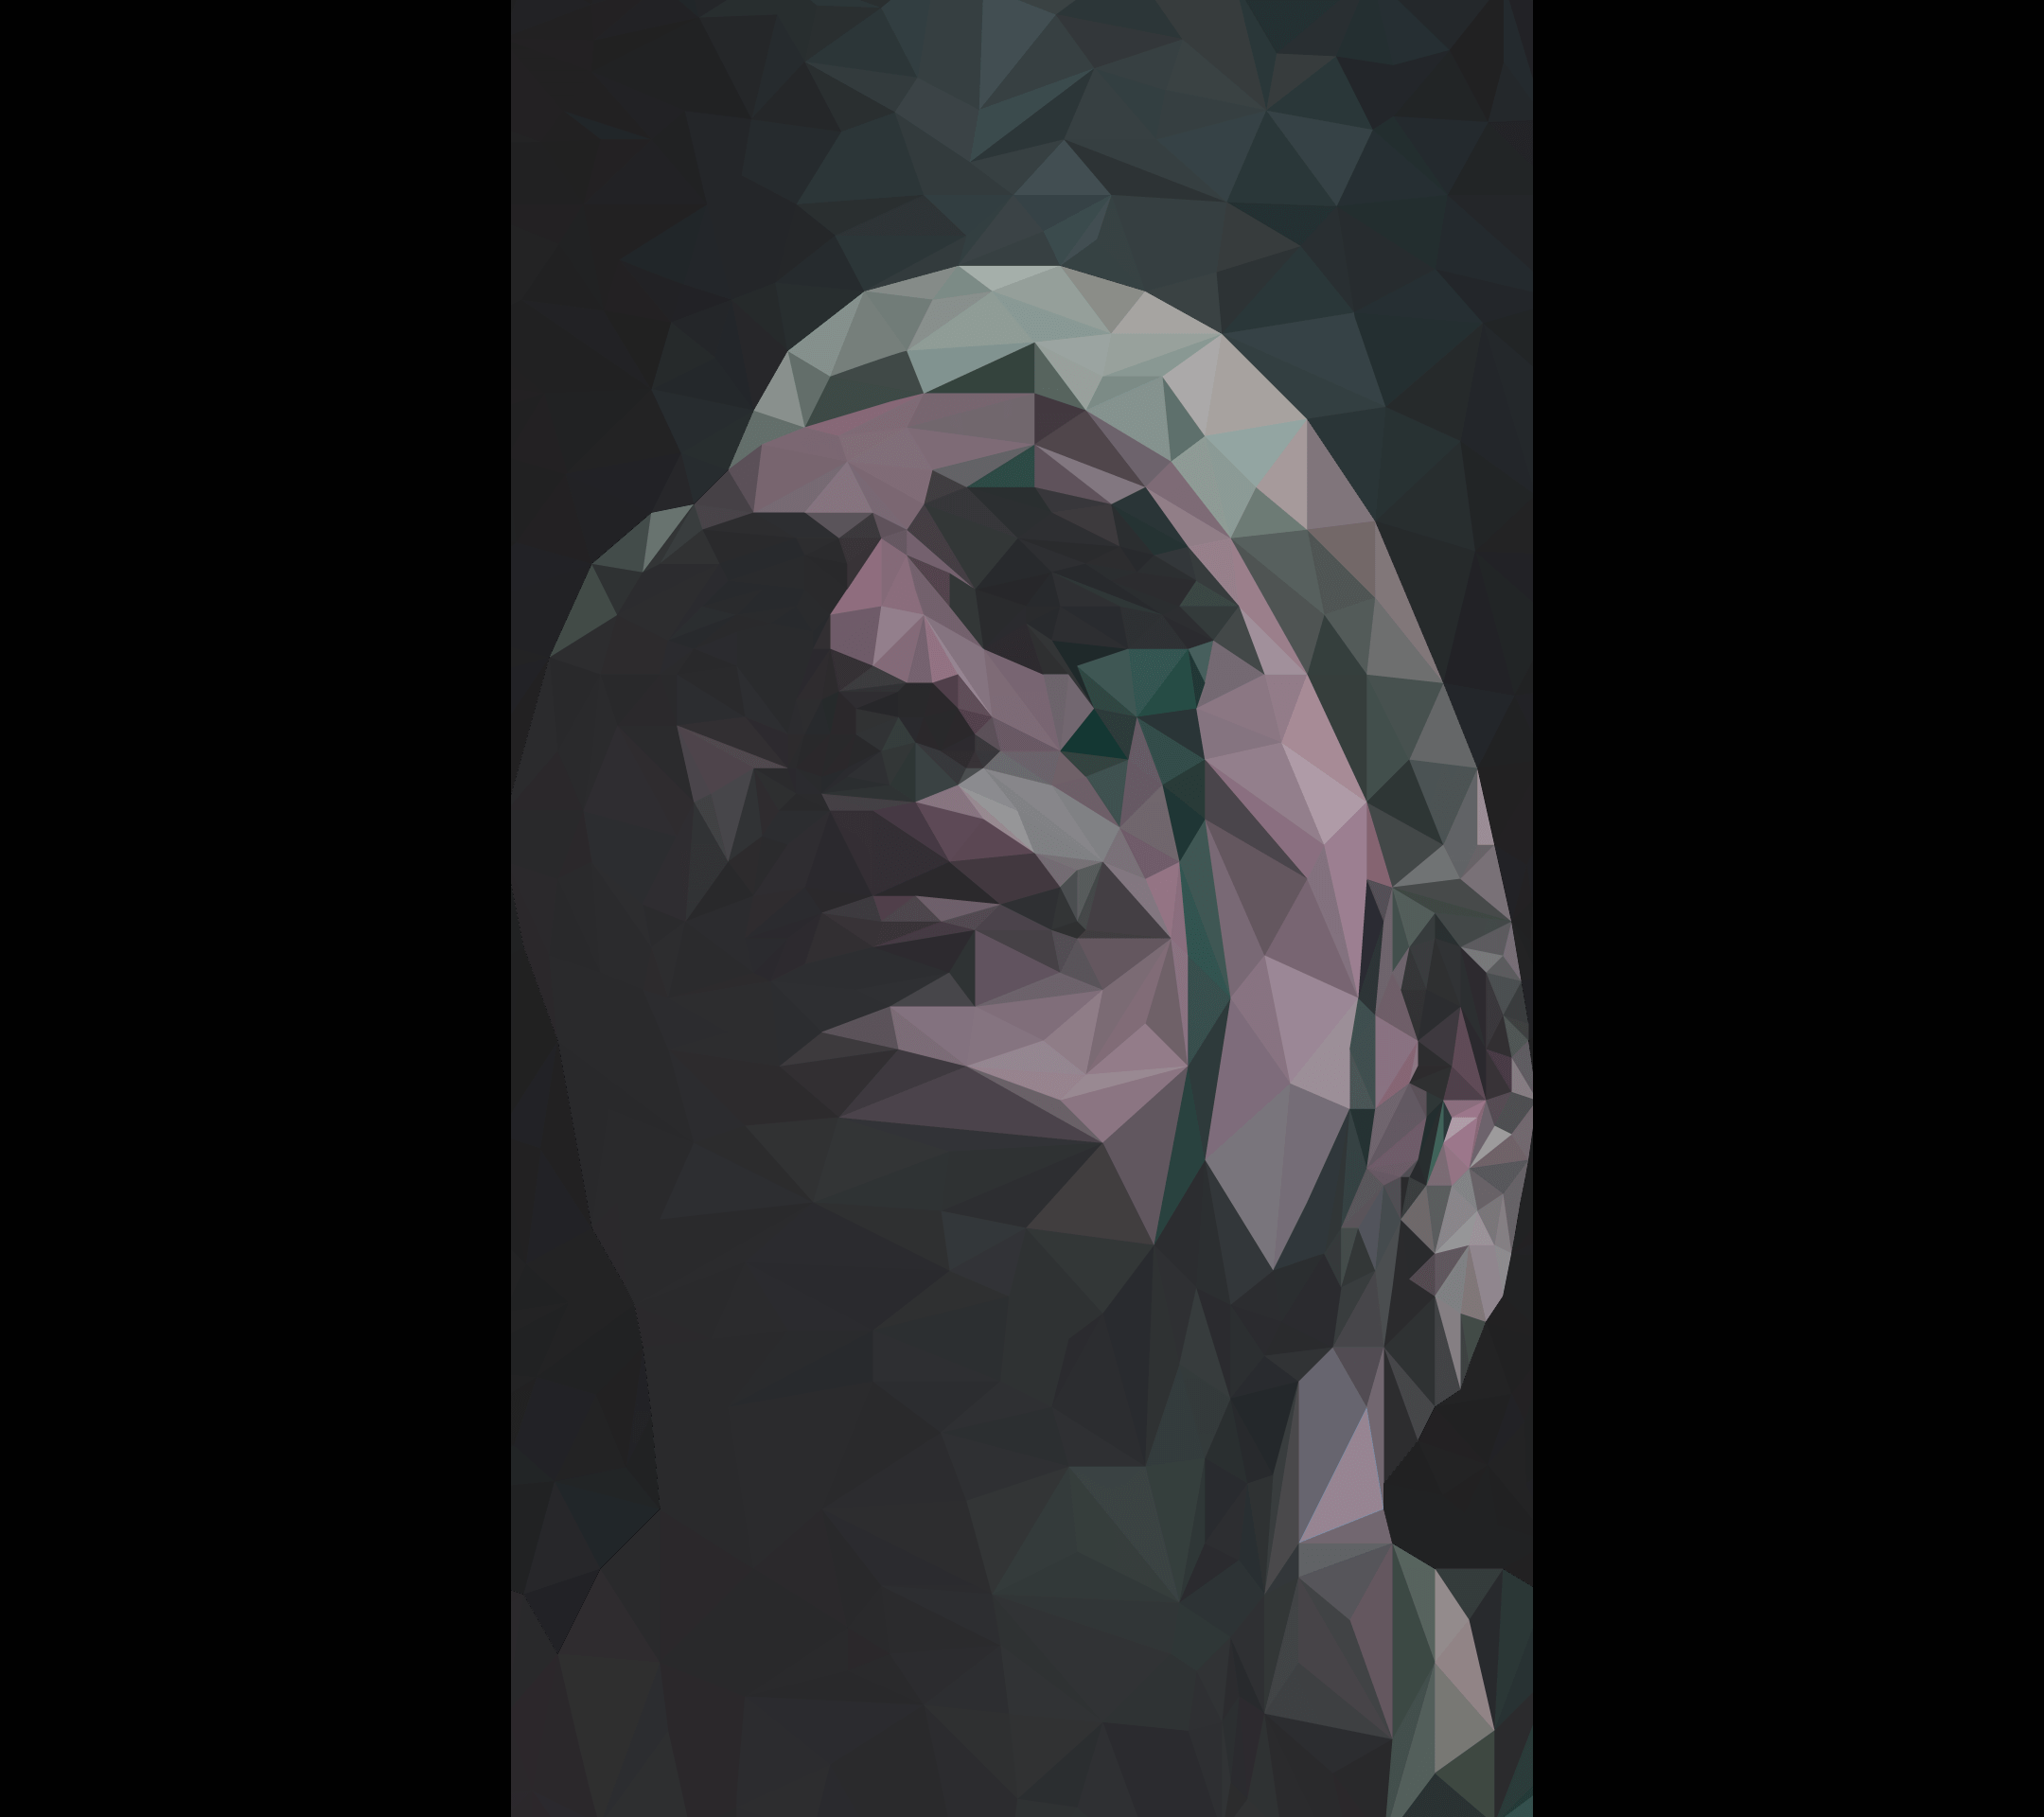 I made a Low Poly phone wallpaper of Mads Mikkelsen in Death